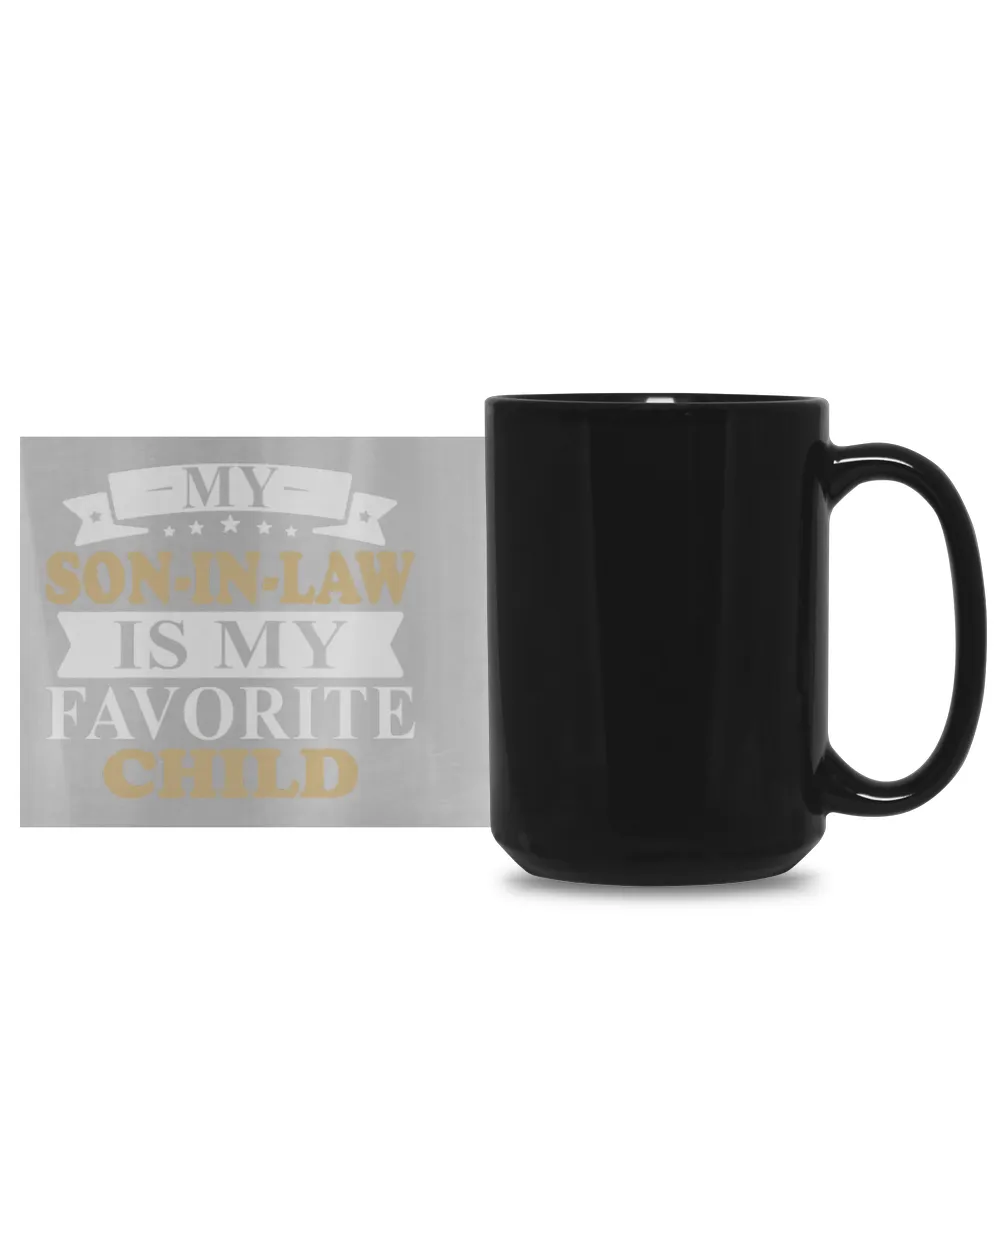 My Son-in-Law is My Favorite Child Ceramic Mug, Funny Mother In Law Coffee Mug, Gift For Mother-in-Law or Father in-Law Birthday